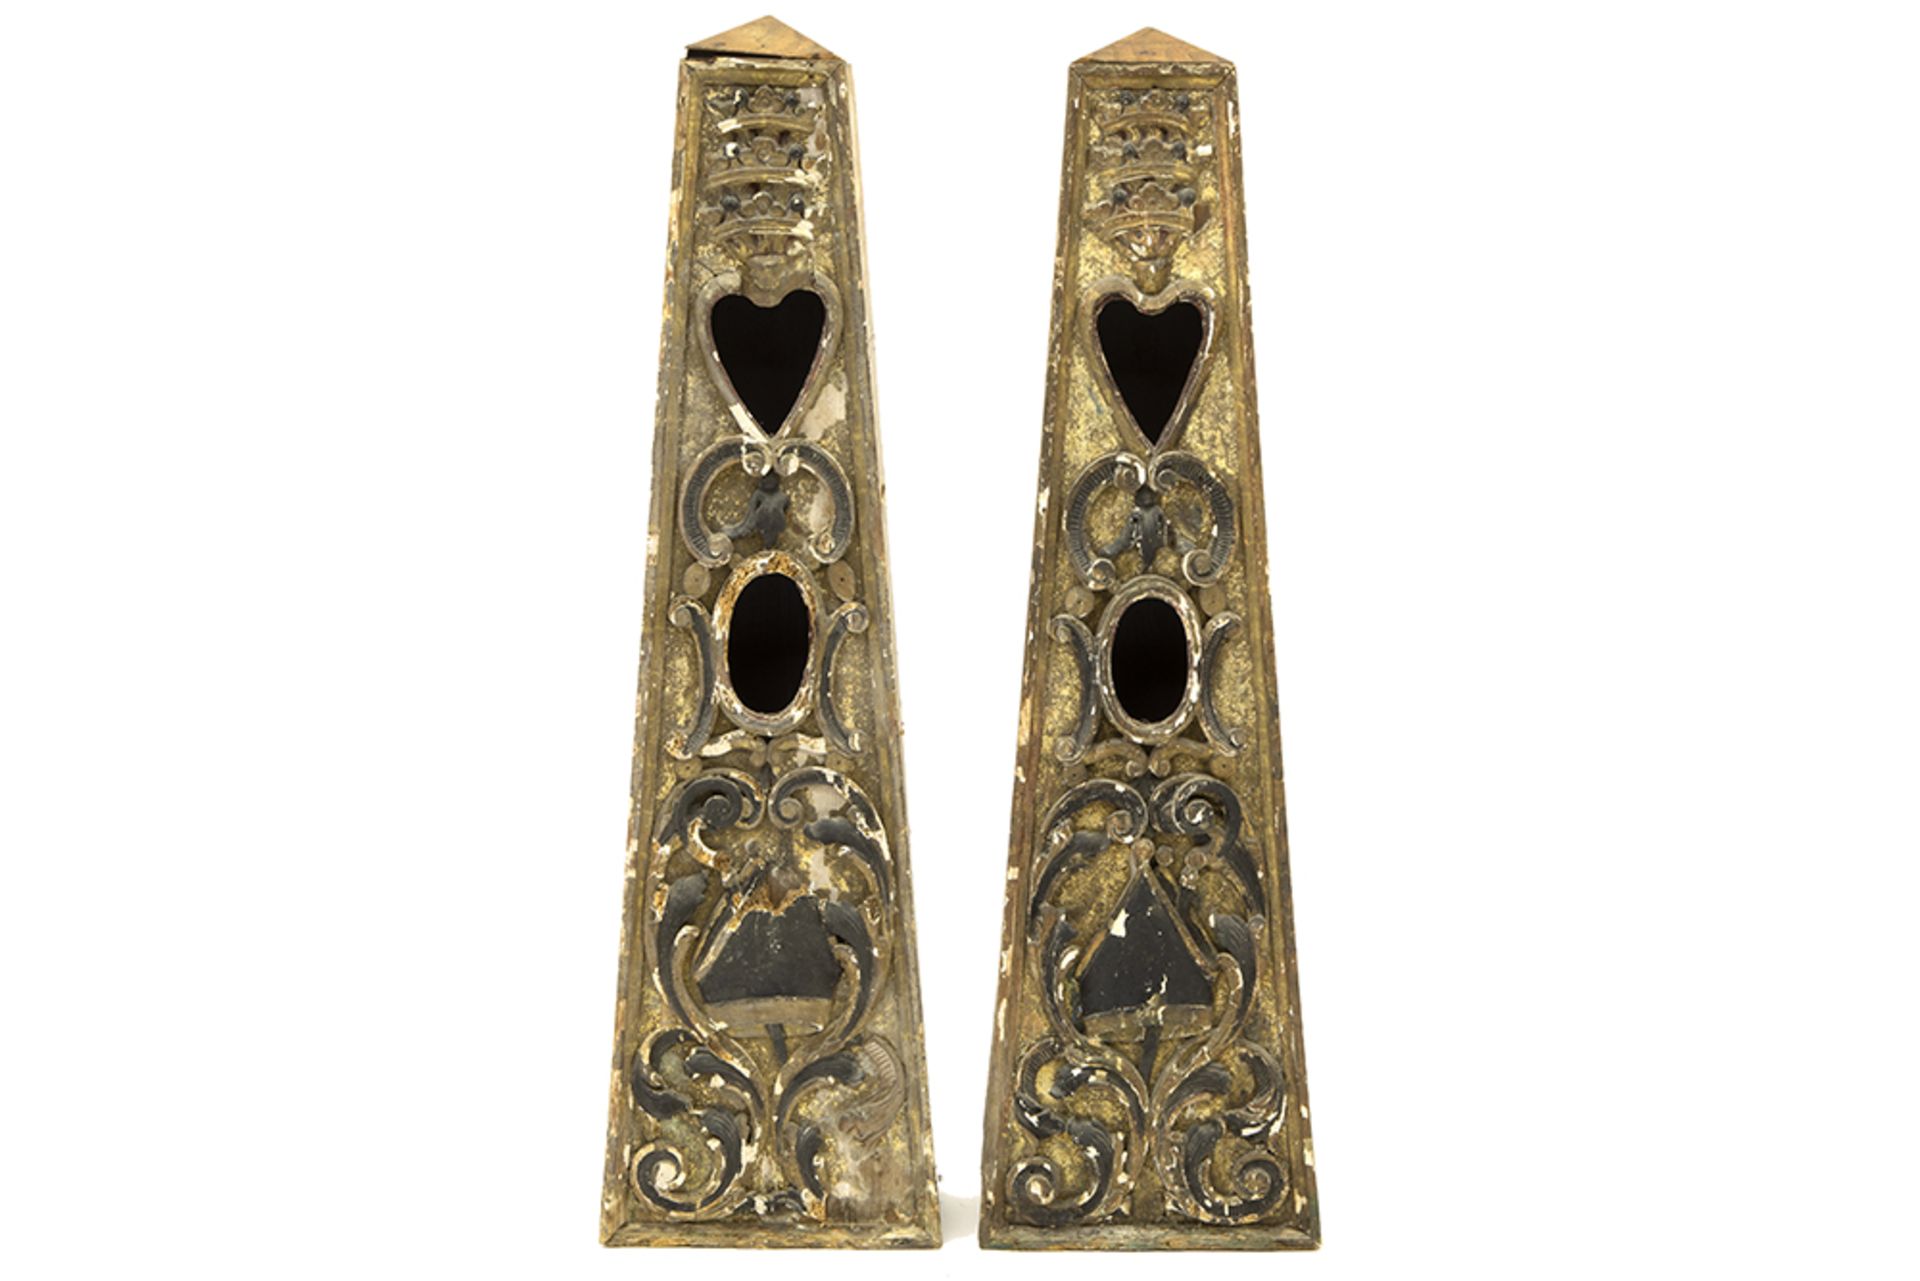 pair of 18th Cent. South European decorative obelisk shaped sculptures in polychromed wood with a - Bild 2 aus 2